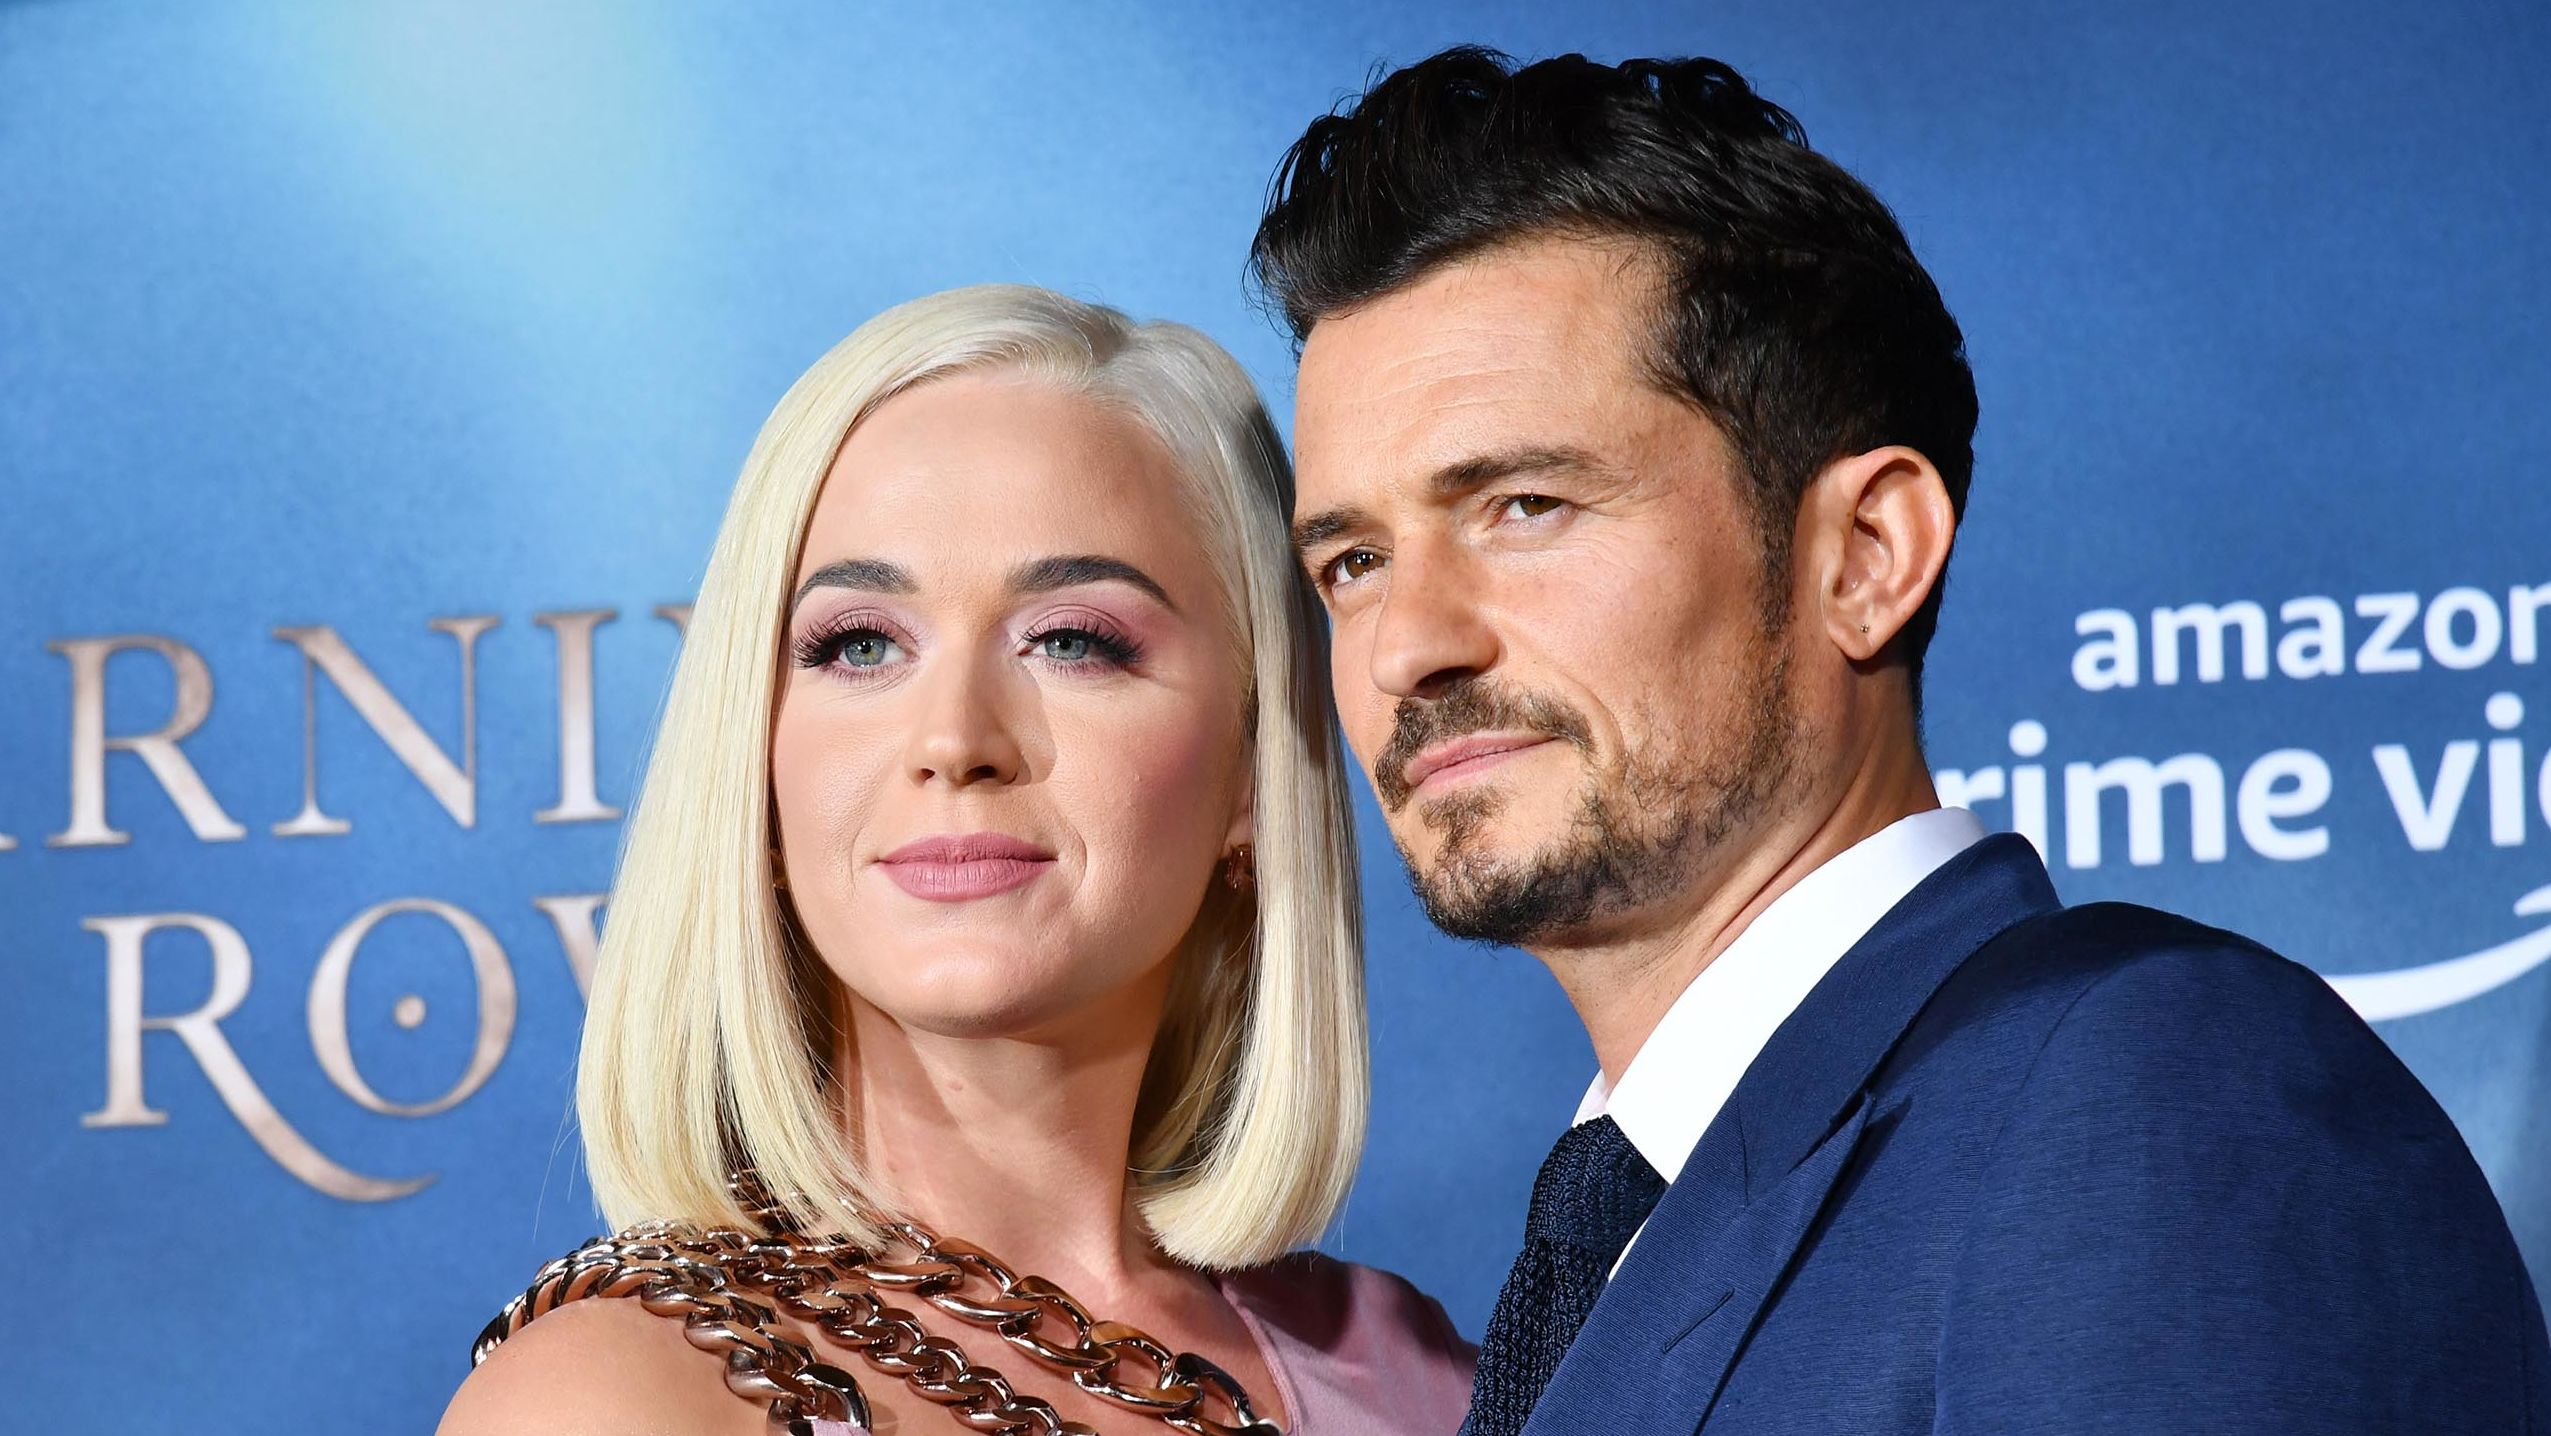 HOLLYWOOD, CALIFORNIA - AUGUST 21: Katy Perry and Orlando Bloom arrive at the LA Premiere Of Amazon's "Carnival Row"  at TCL Chinese Theatre on August 21, 2019 in Hollywood, California. (Photo by Amy Sussman/FilmMagic,)